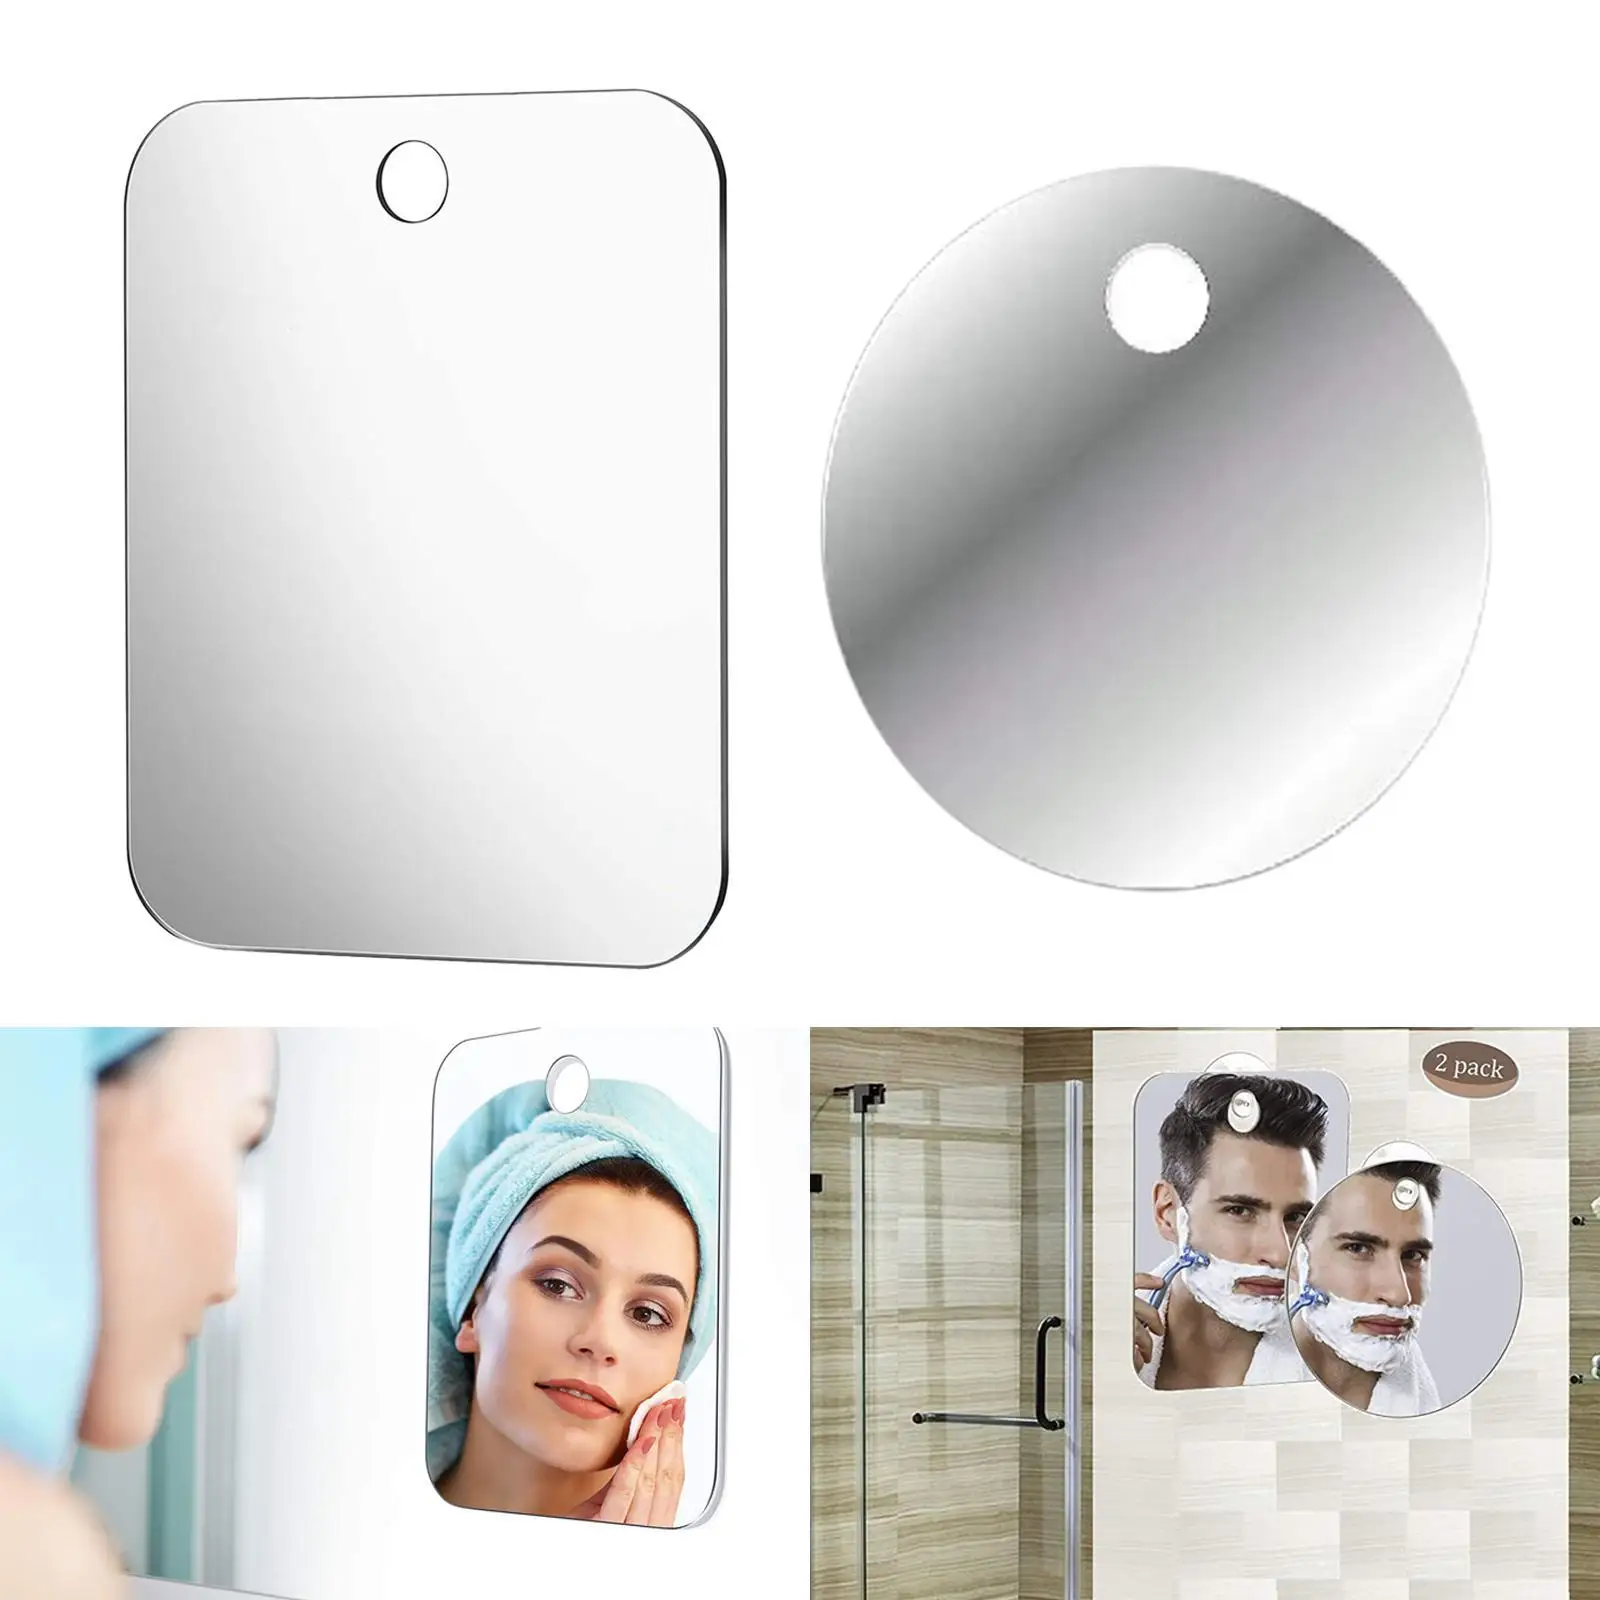  Shower Mirror, Anti Fog with Holder Bathroom Shaving Mirror, Fog- Wall Hanging Mirror for Bathroom Home Traveling